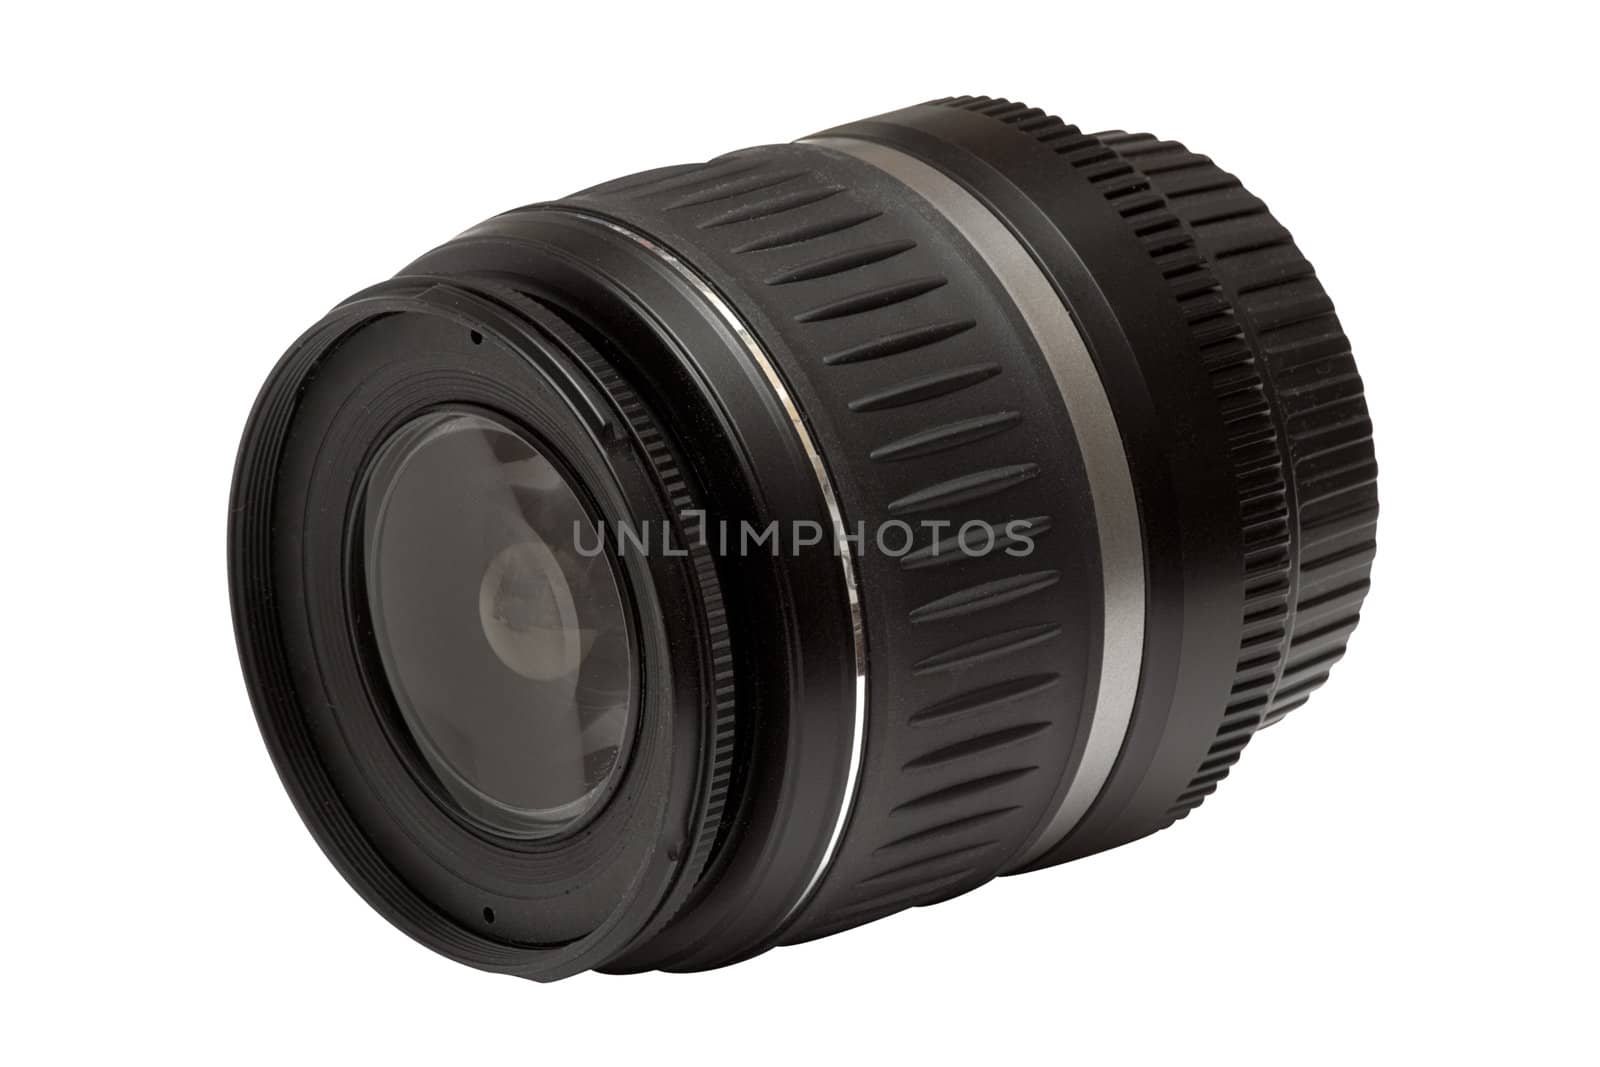 Short zoom lens isolated on a white background. File contains clipping path.